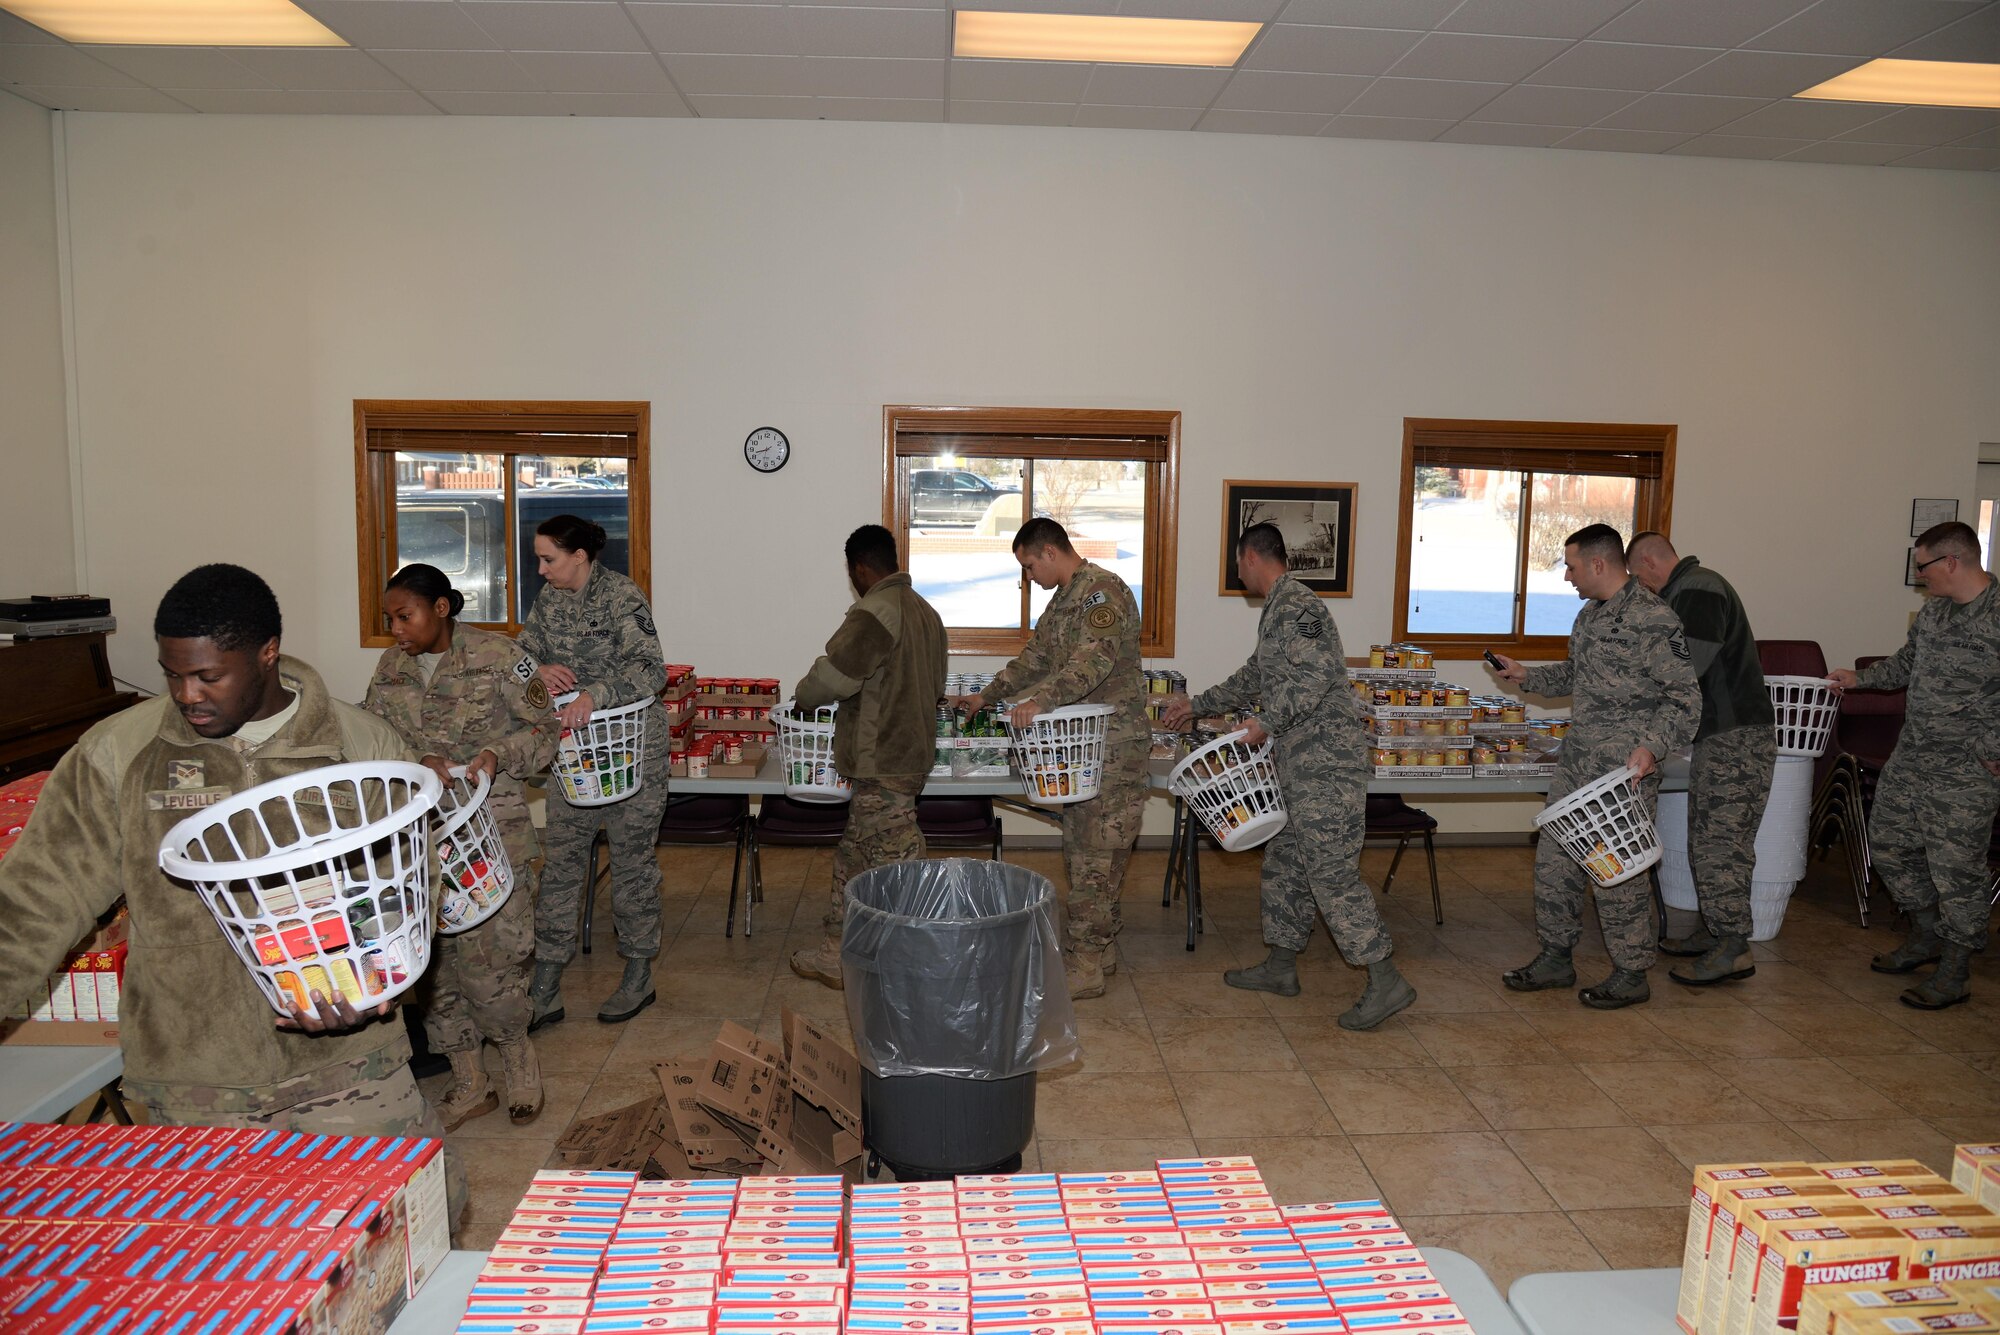 First sergeant council volunteers form an assembly line to quickly and efficiently build Thanksgiving baskets in the High Plains chapel at F.E. Warren Air Force Base, Wyo., Nov. 18, 2016.  Volunteers put together 125 baskets equipped with everything needed to provide a complete meal, including a gift card to purchase a turkey. The baskets will be delivered to junior-ranking Airmen, selected by their chain of command, to ensure their families are able to enjoy a Thanksgiving meal for the holiday. (U.S. Photo by 2d Lt. Nikita Thorpe)